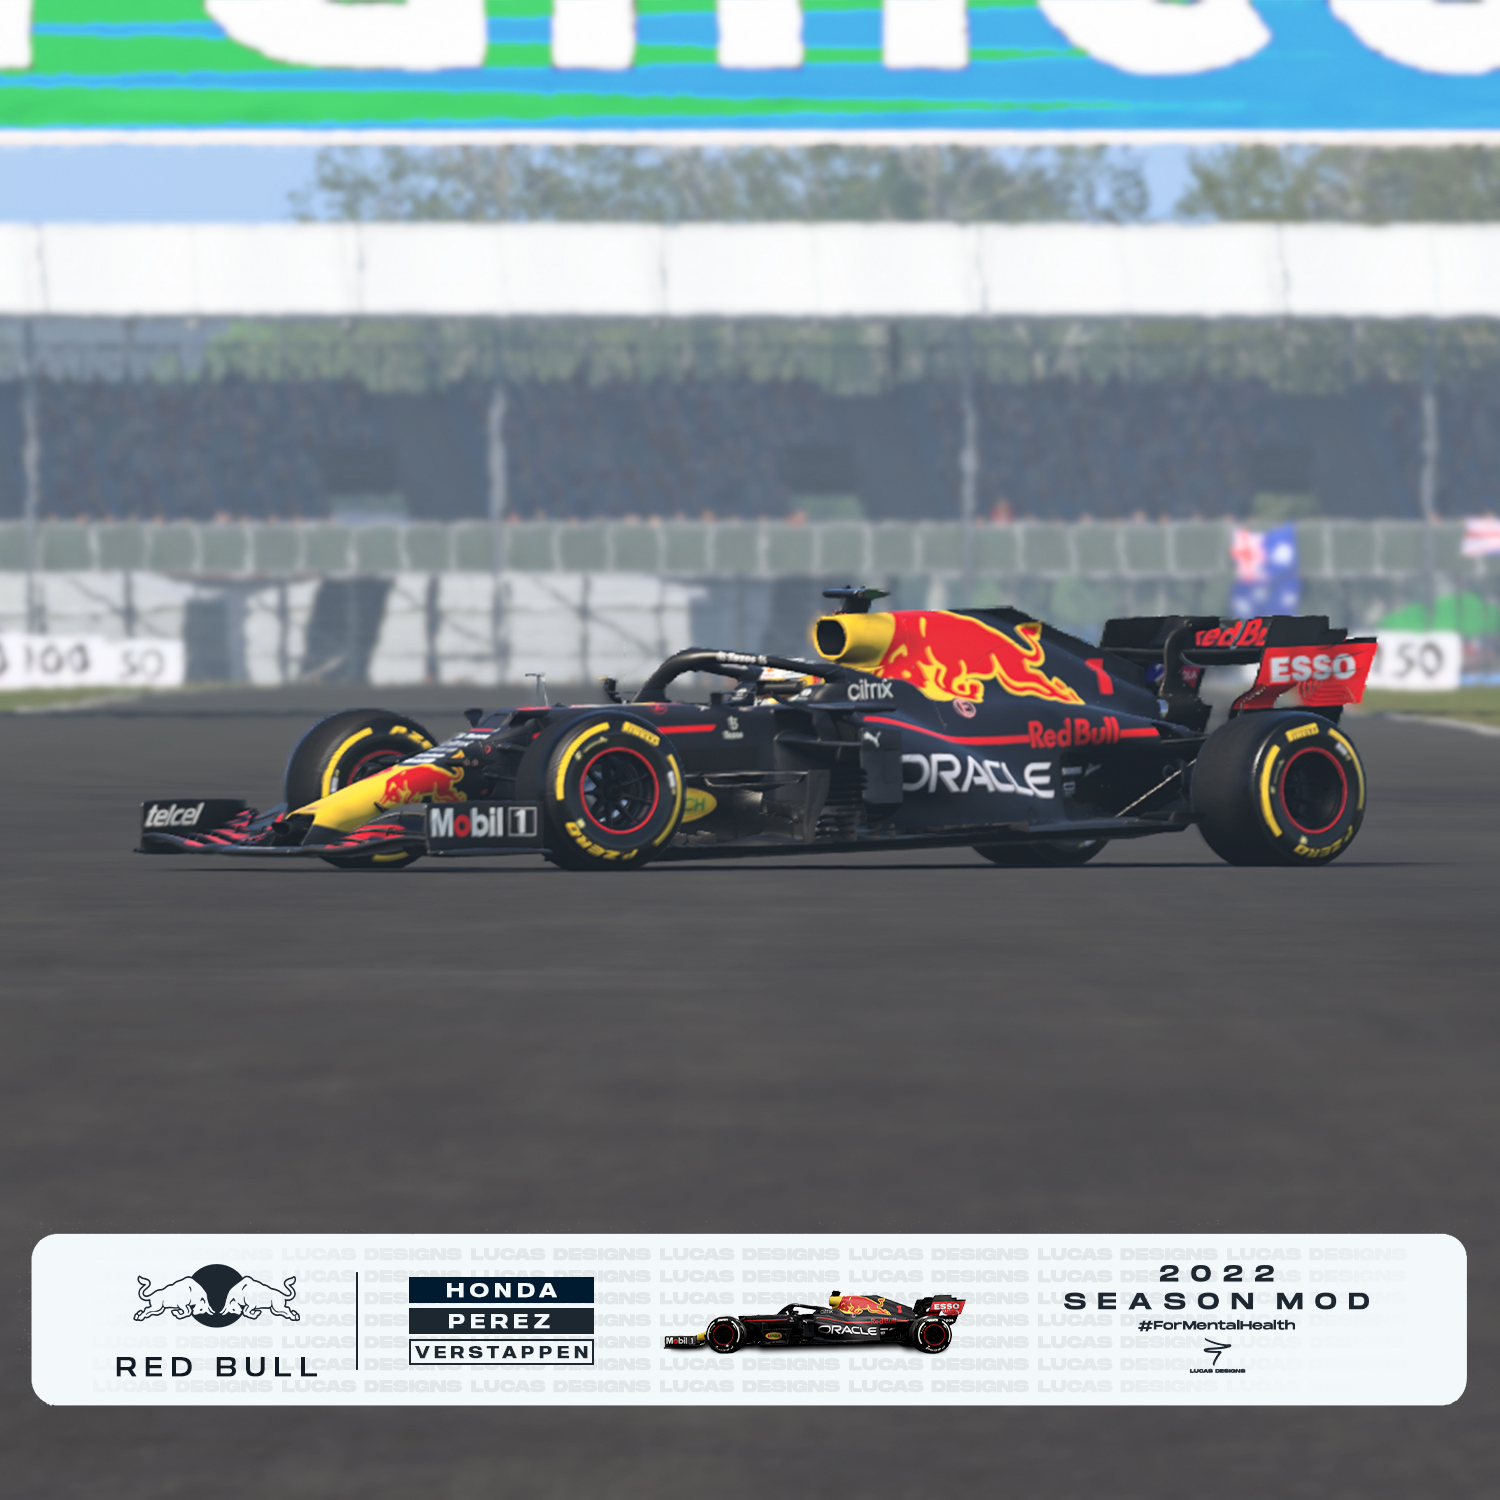 Red Bull oficial by LD.jpg